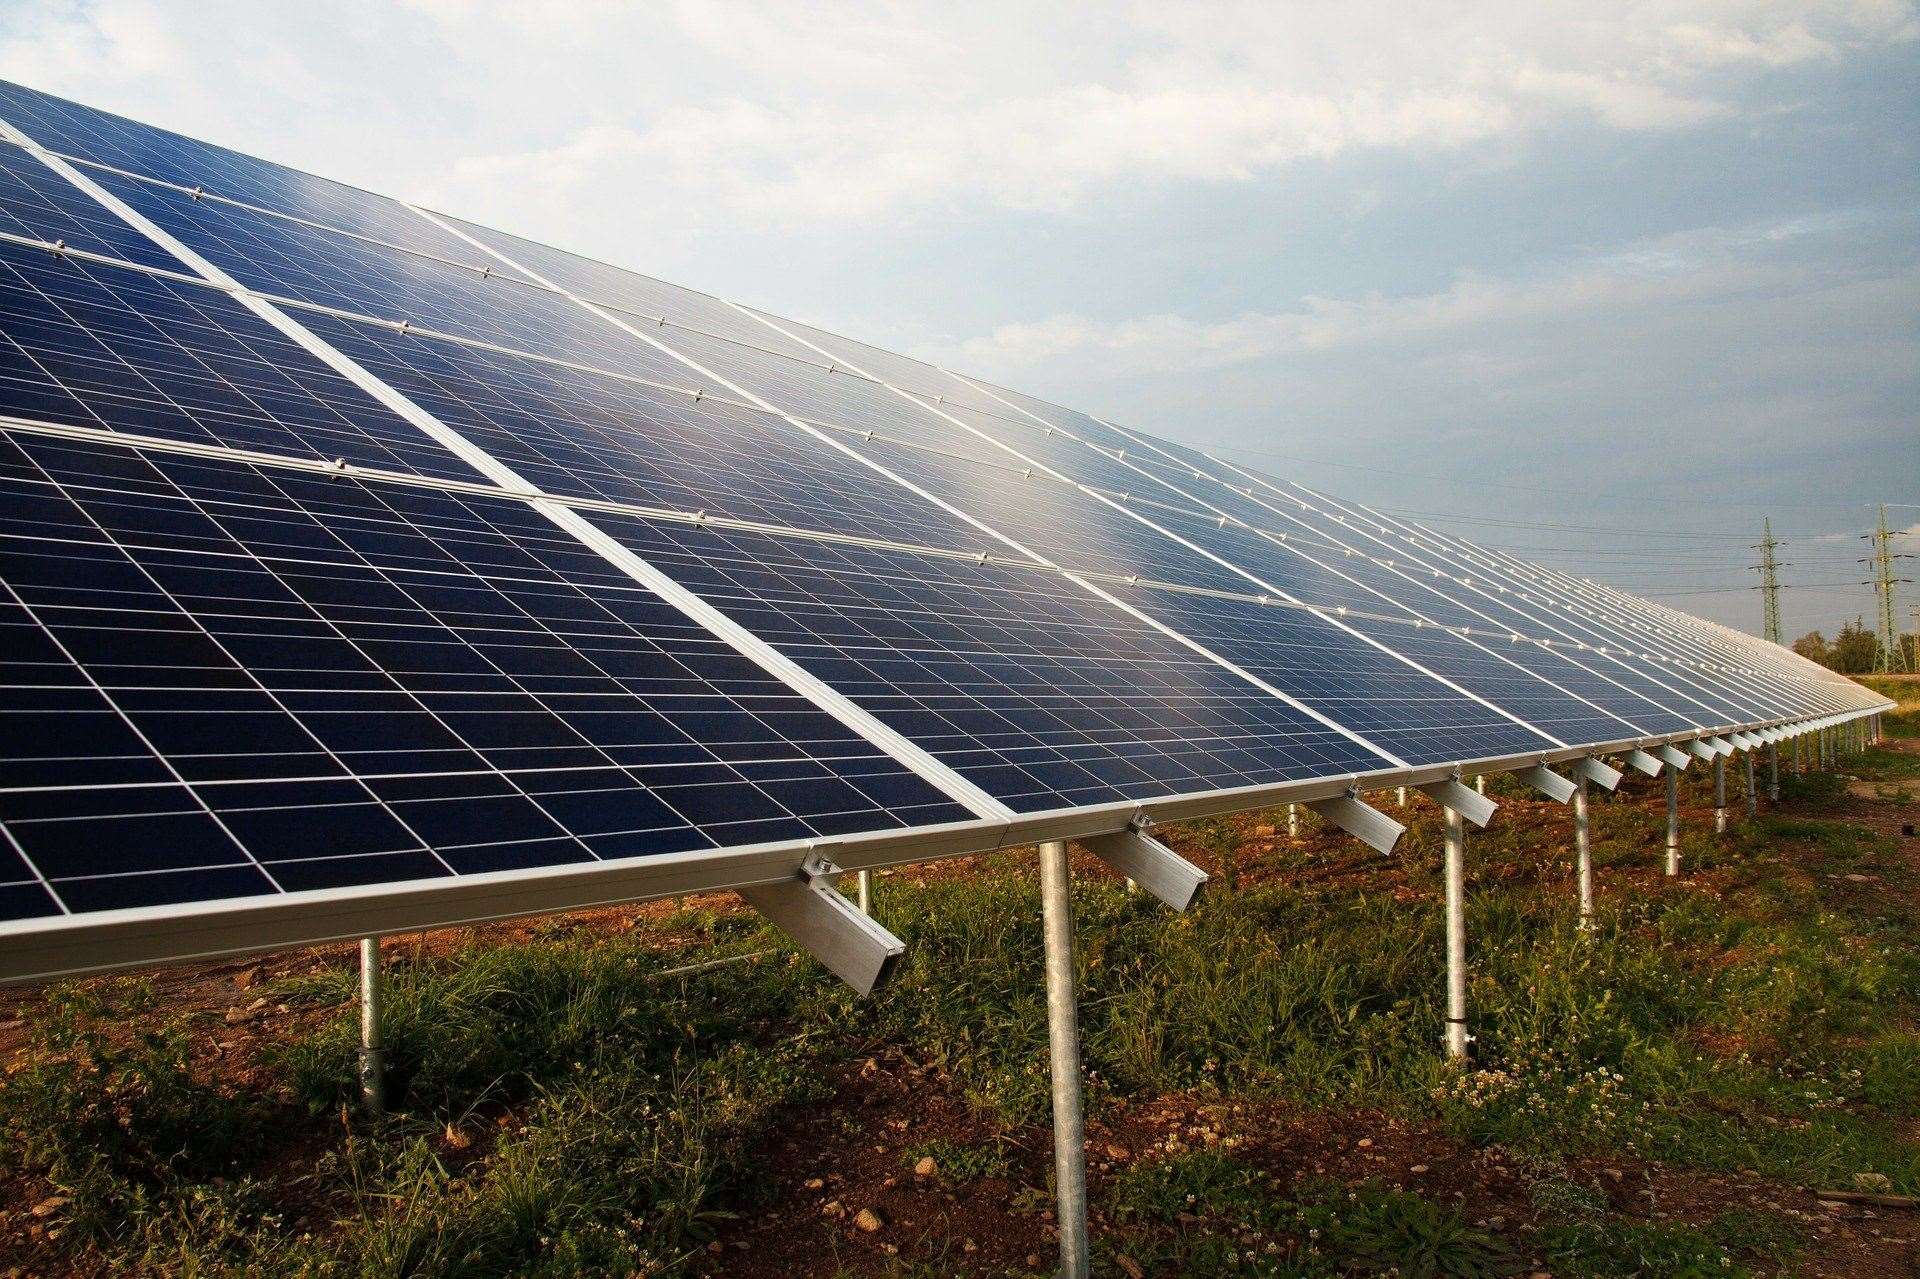 The decision to approve the UK's biggest solar farm will not be taken to a judicial review